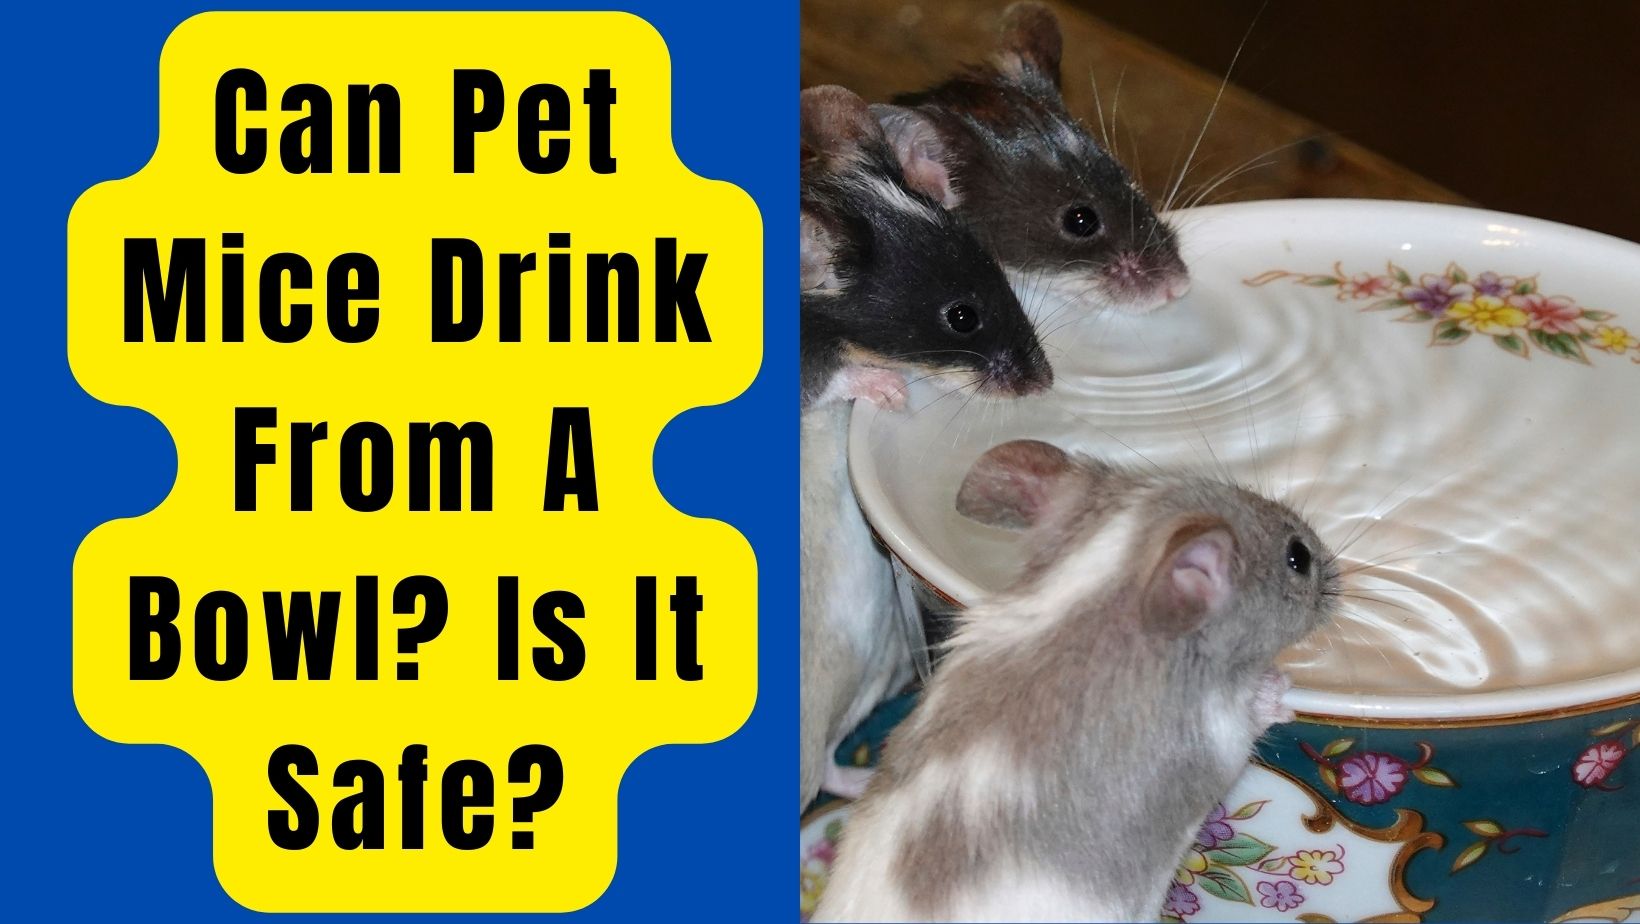 Can Pet Mice Drink From A Bowl? Is It Safe?